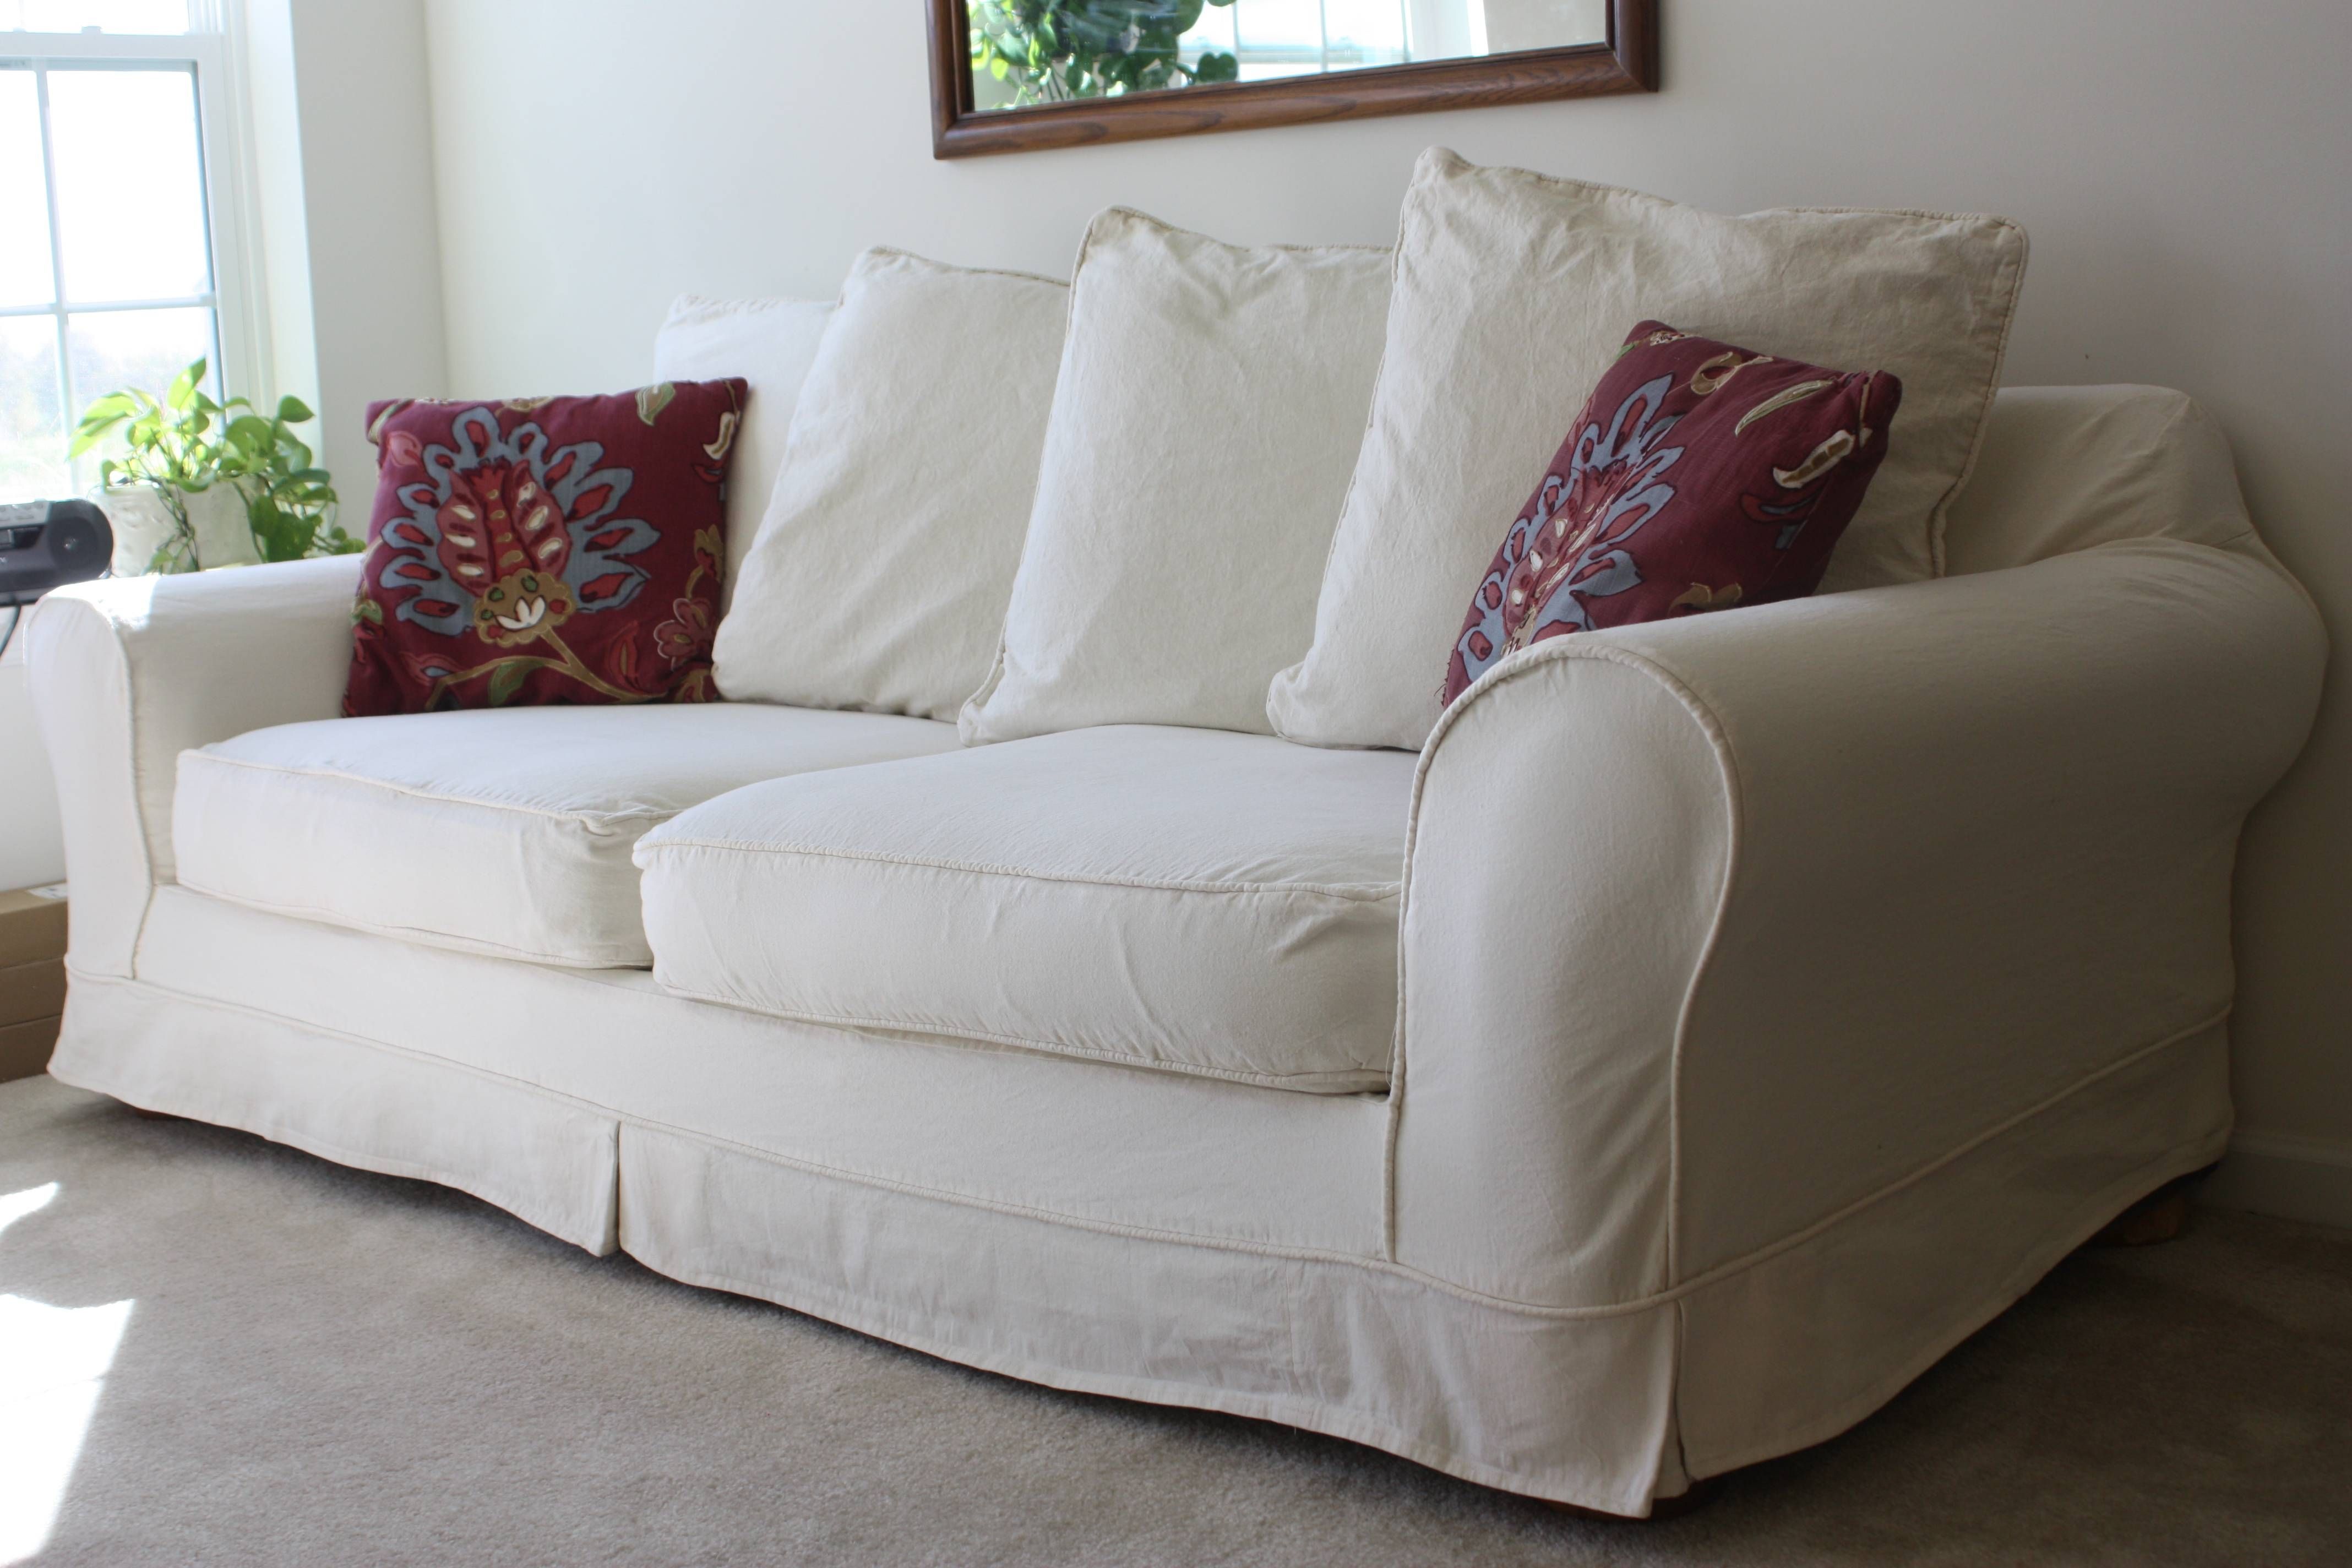 White Slipcovered Sofa For Nice Living Room | Homesfeed With Regard To Canvas Sofa Slipcovers (View 3 of 15)